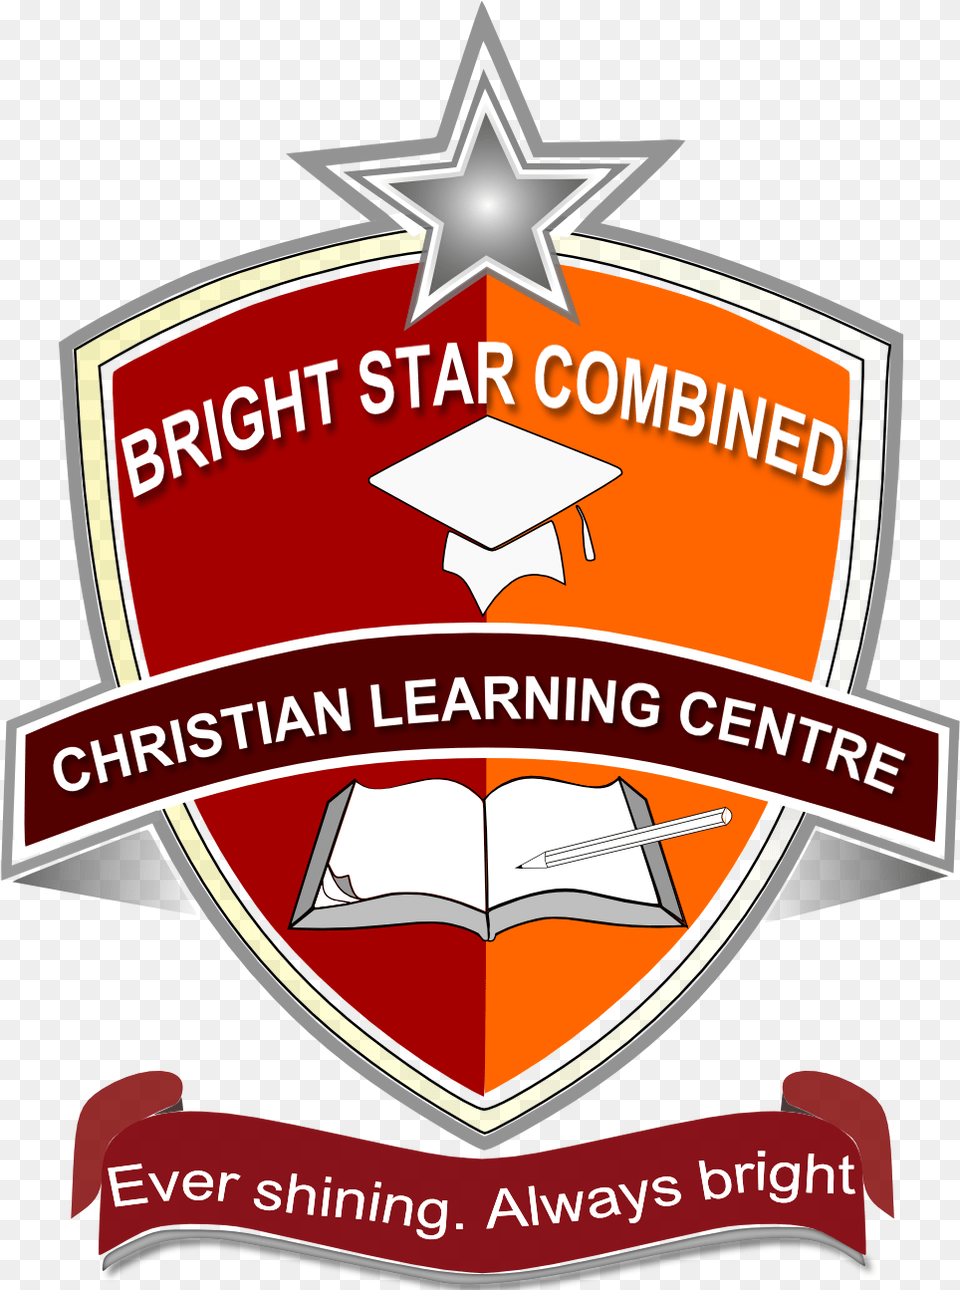 At Bright Star Christian Learning Centre We Believe Bright Bright Star Christian Learning Center, Badge, Logo, Symbol, Dynamite Free Transparent Png